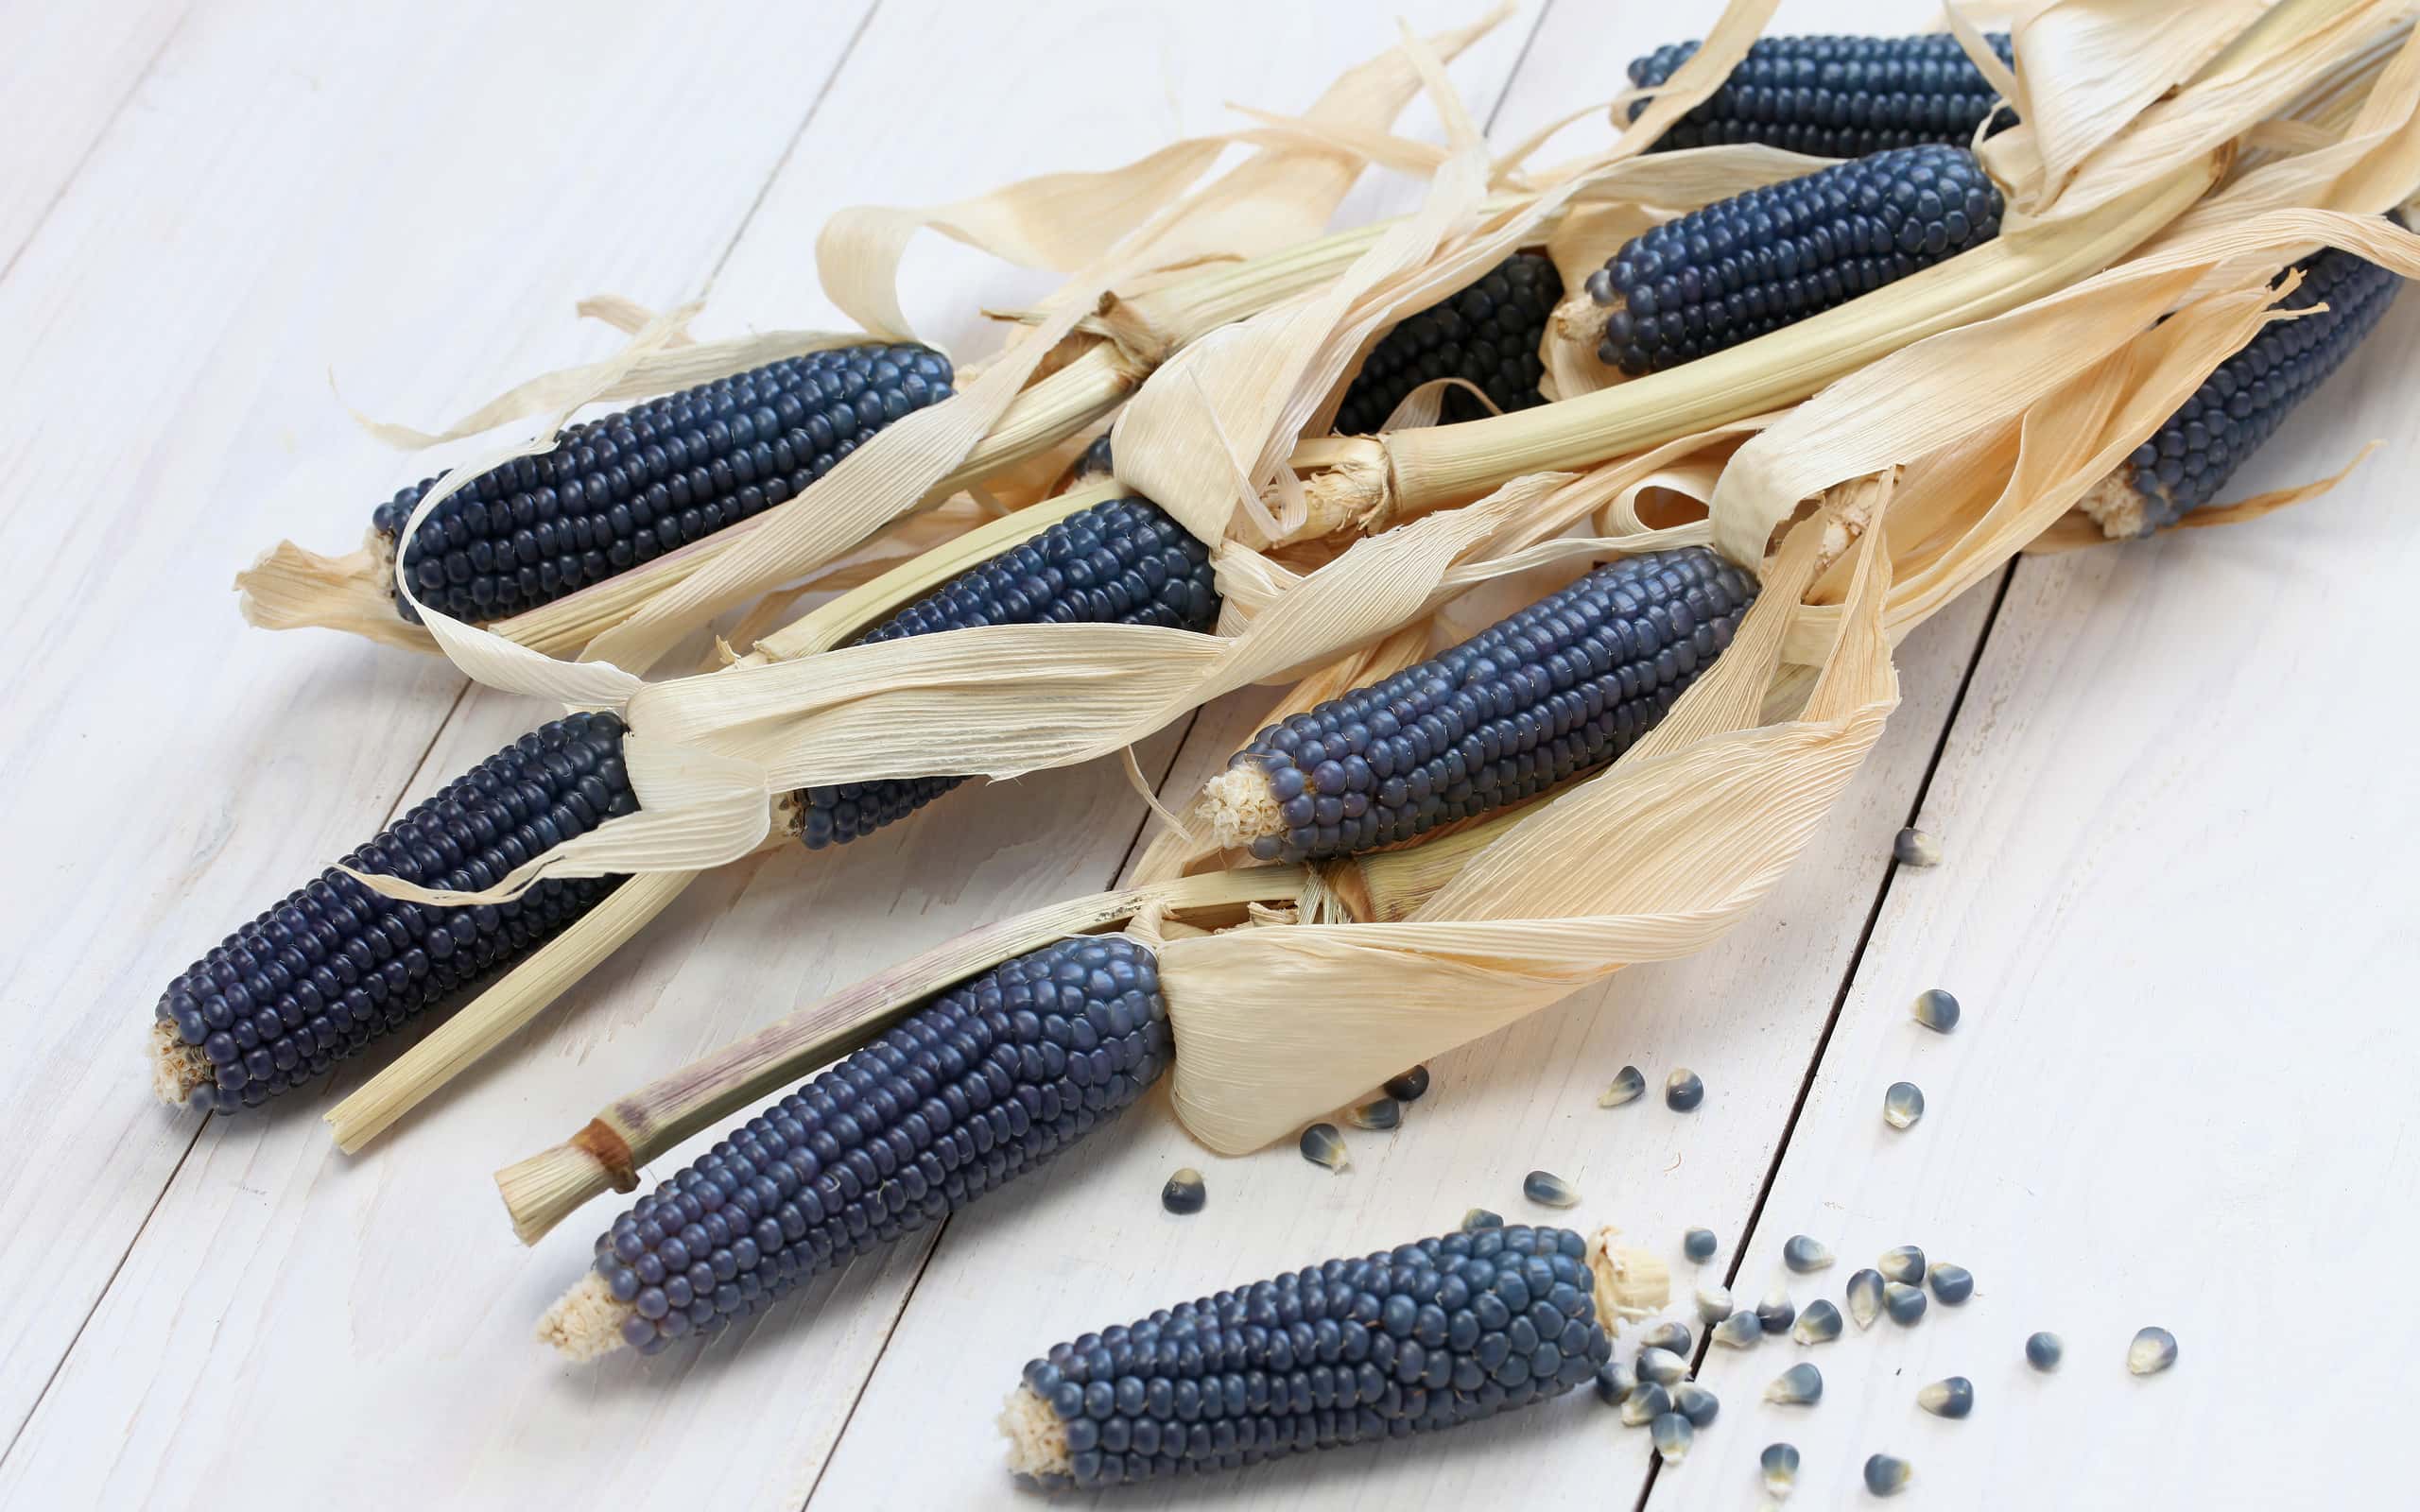 Hopi Blue corn is a variety of flour corn grown in drier regions.